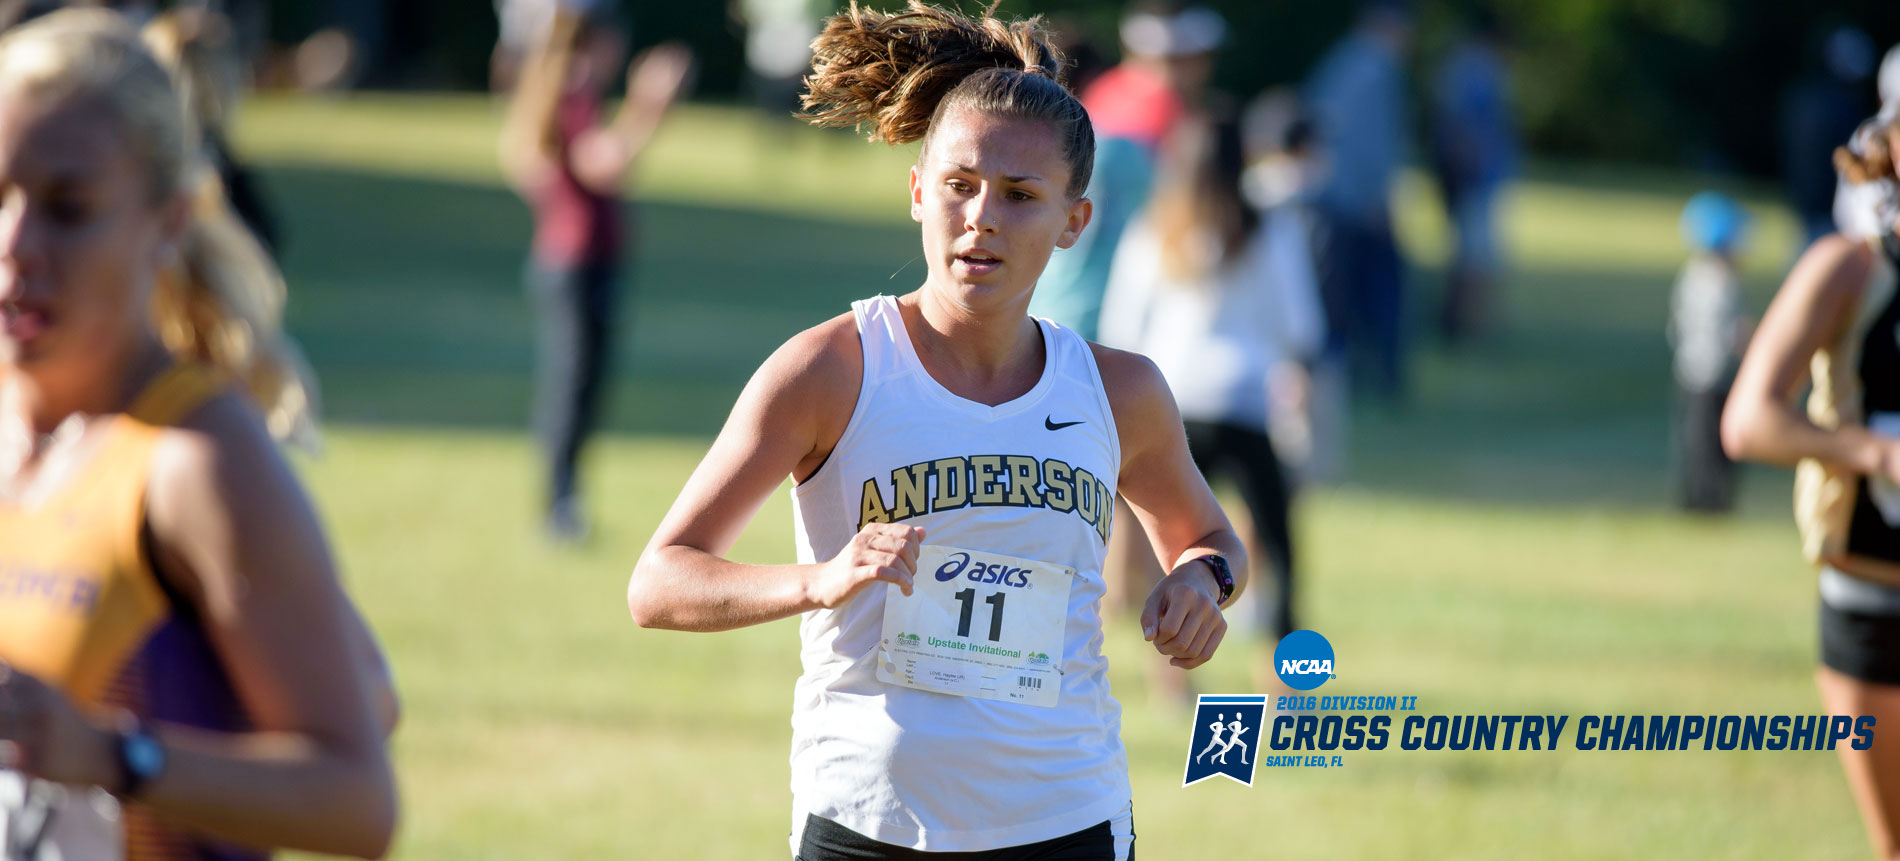 Love Finishes 197th at NCAA Cross Country National Championships